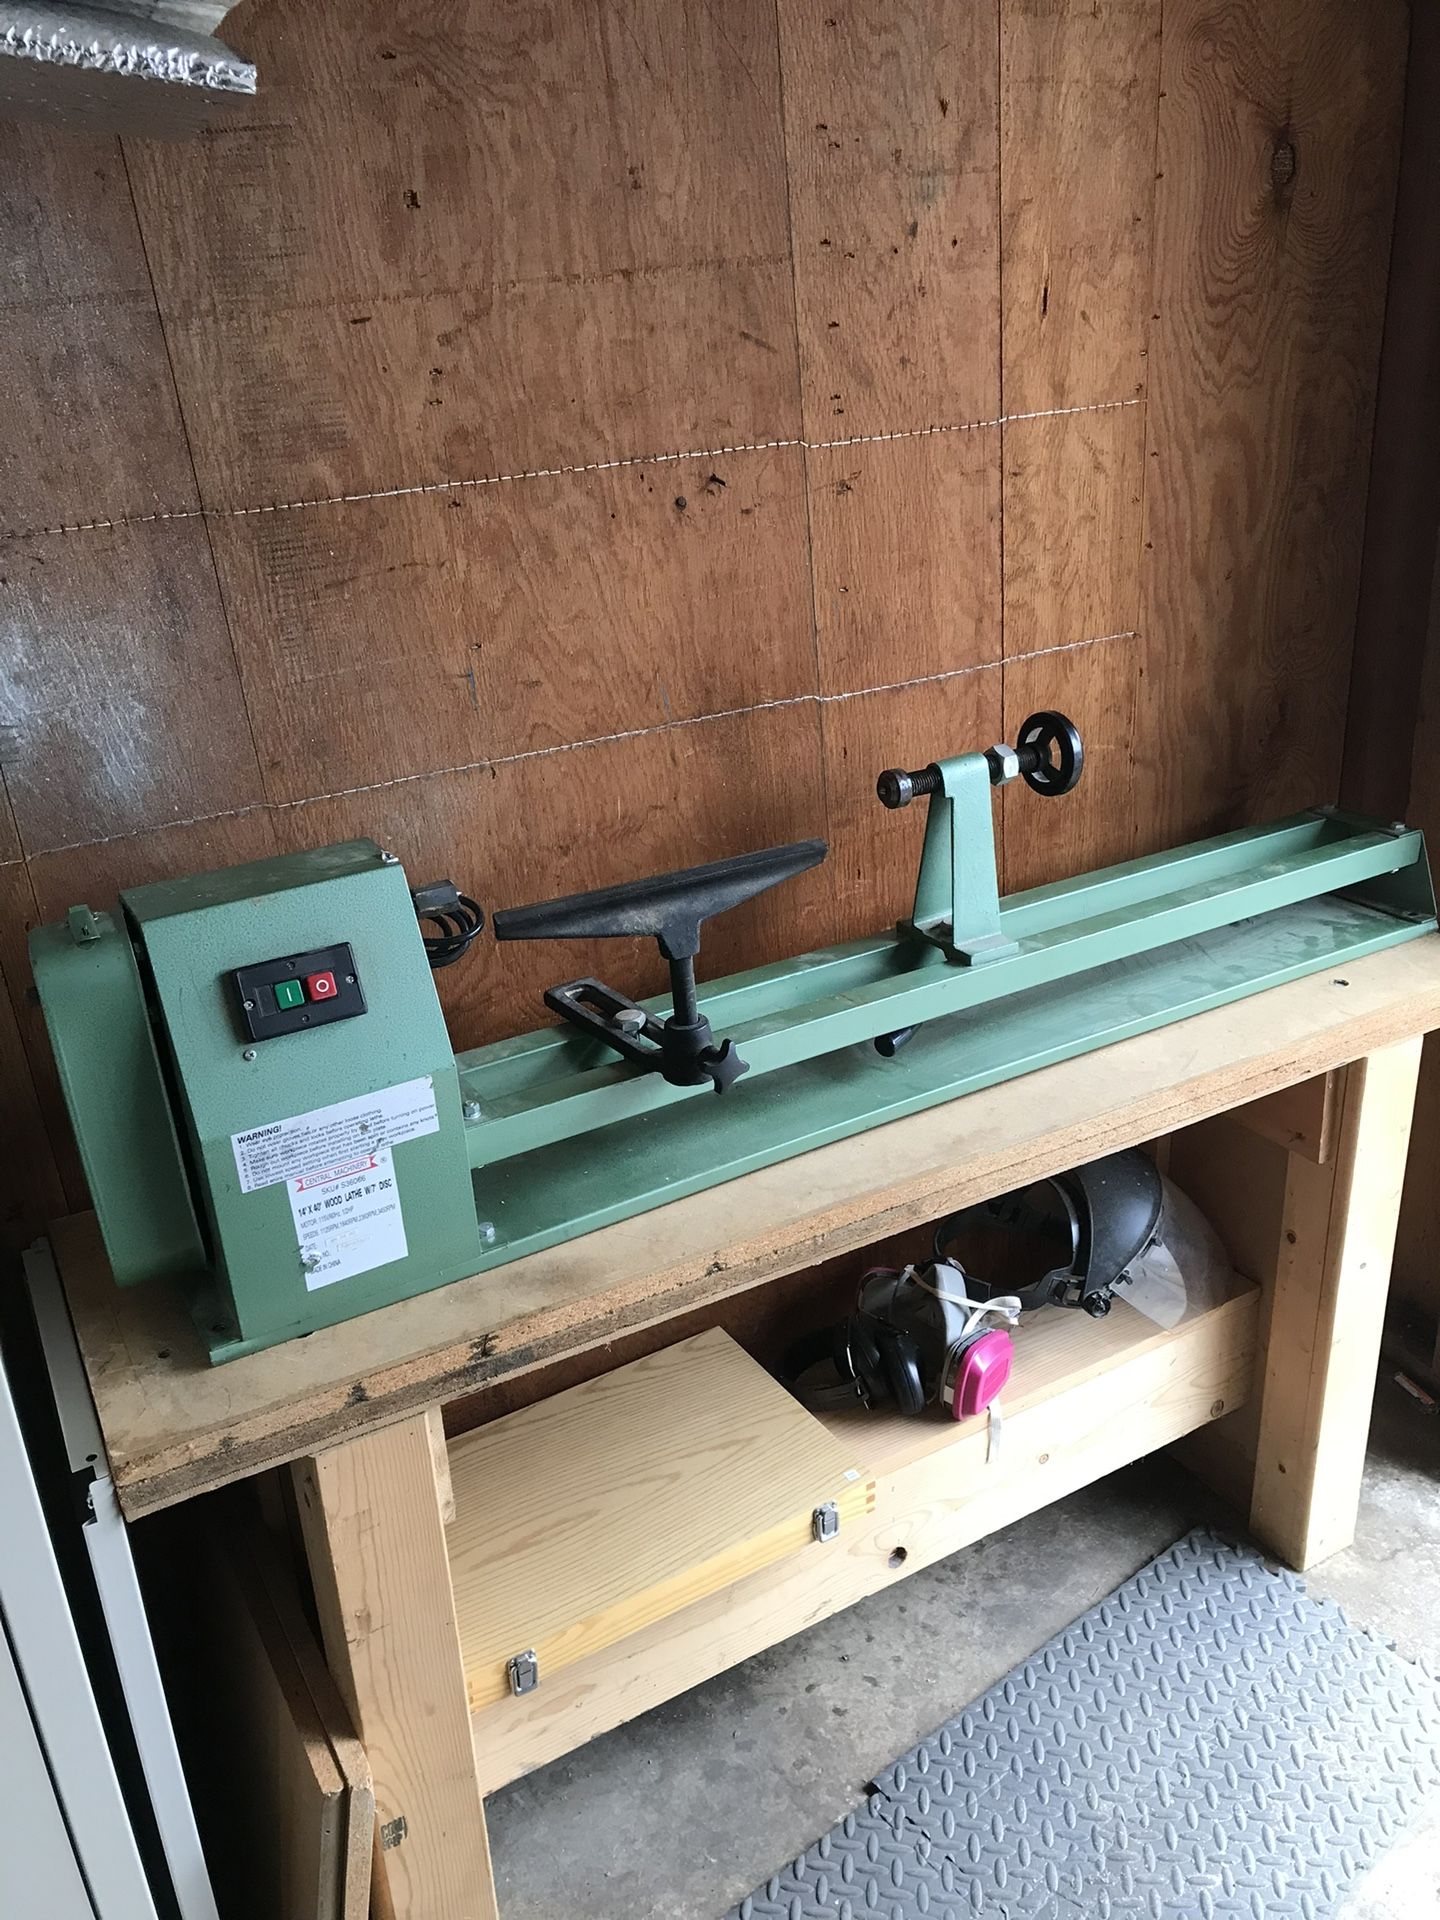 Central Machinery 14x40” Wood Lathe